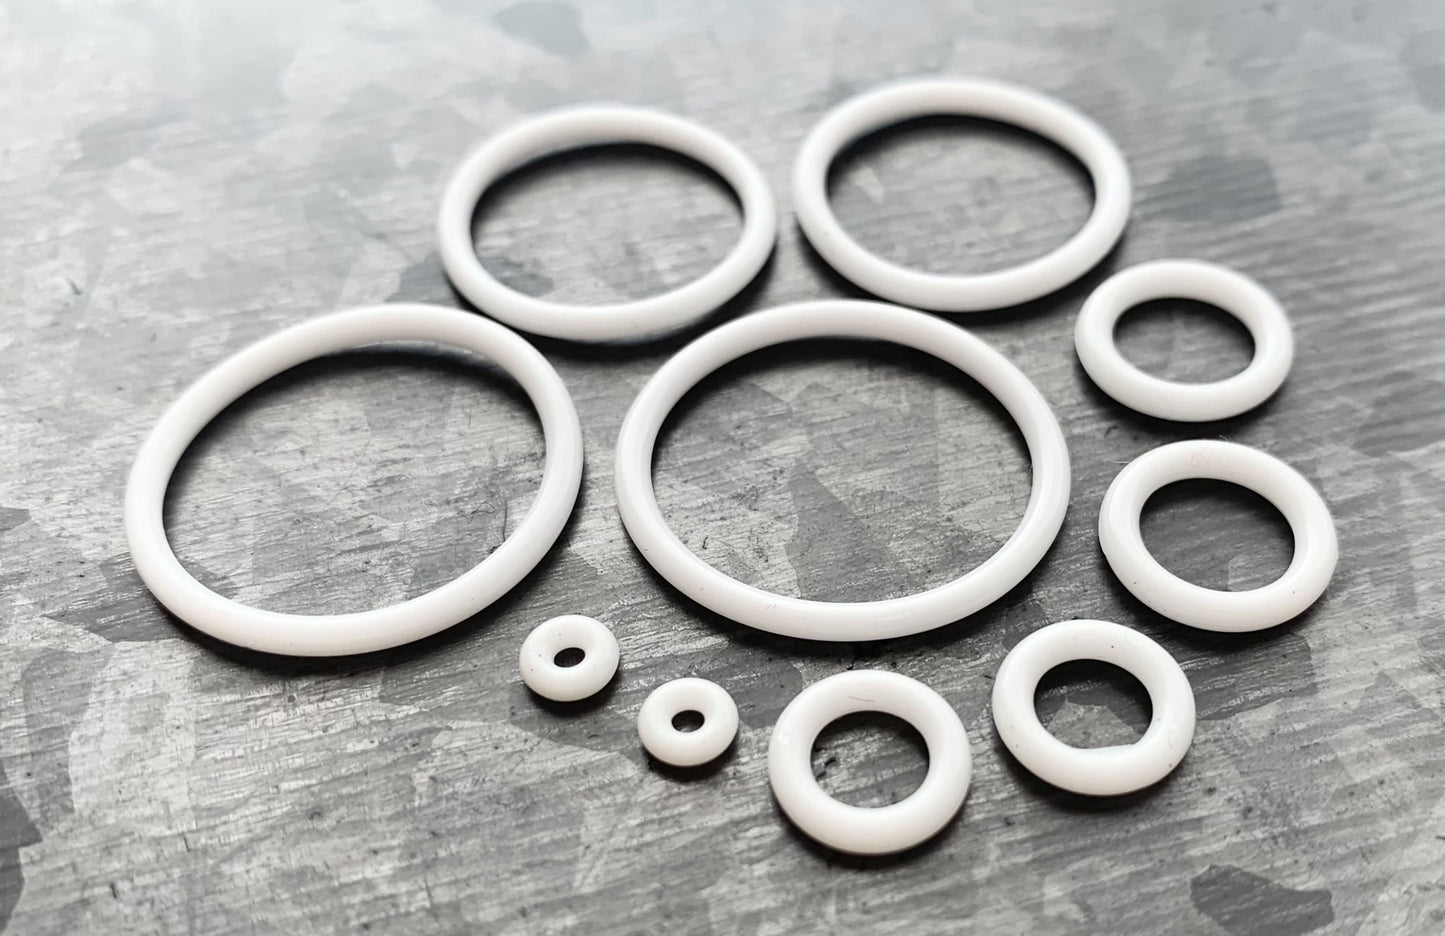 10 pack of White Replacement O-Rings Bands for Plugs or Tunnels - 13 more colors available!